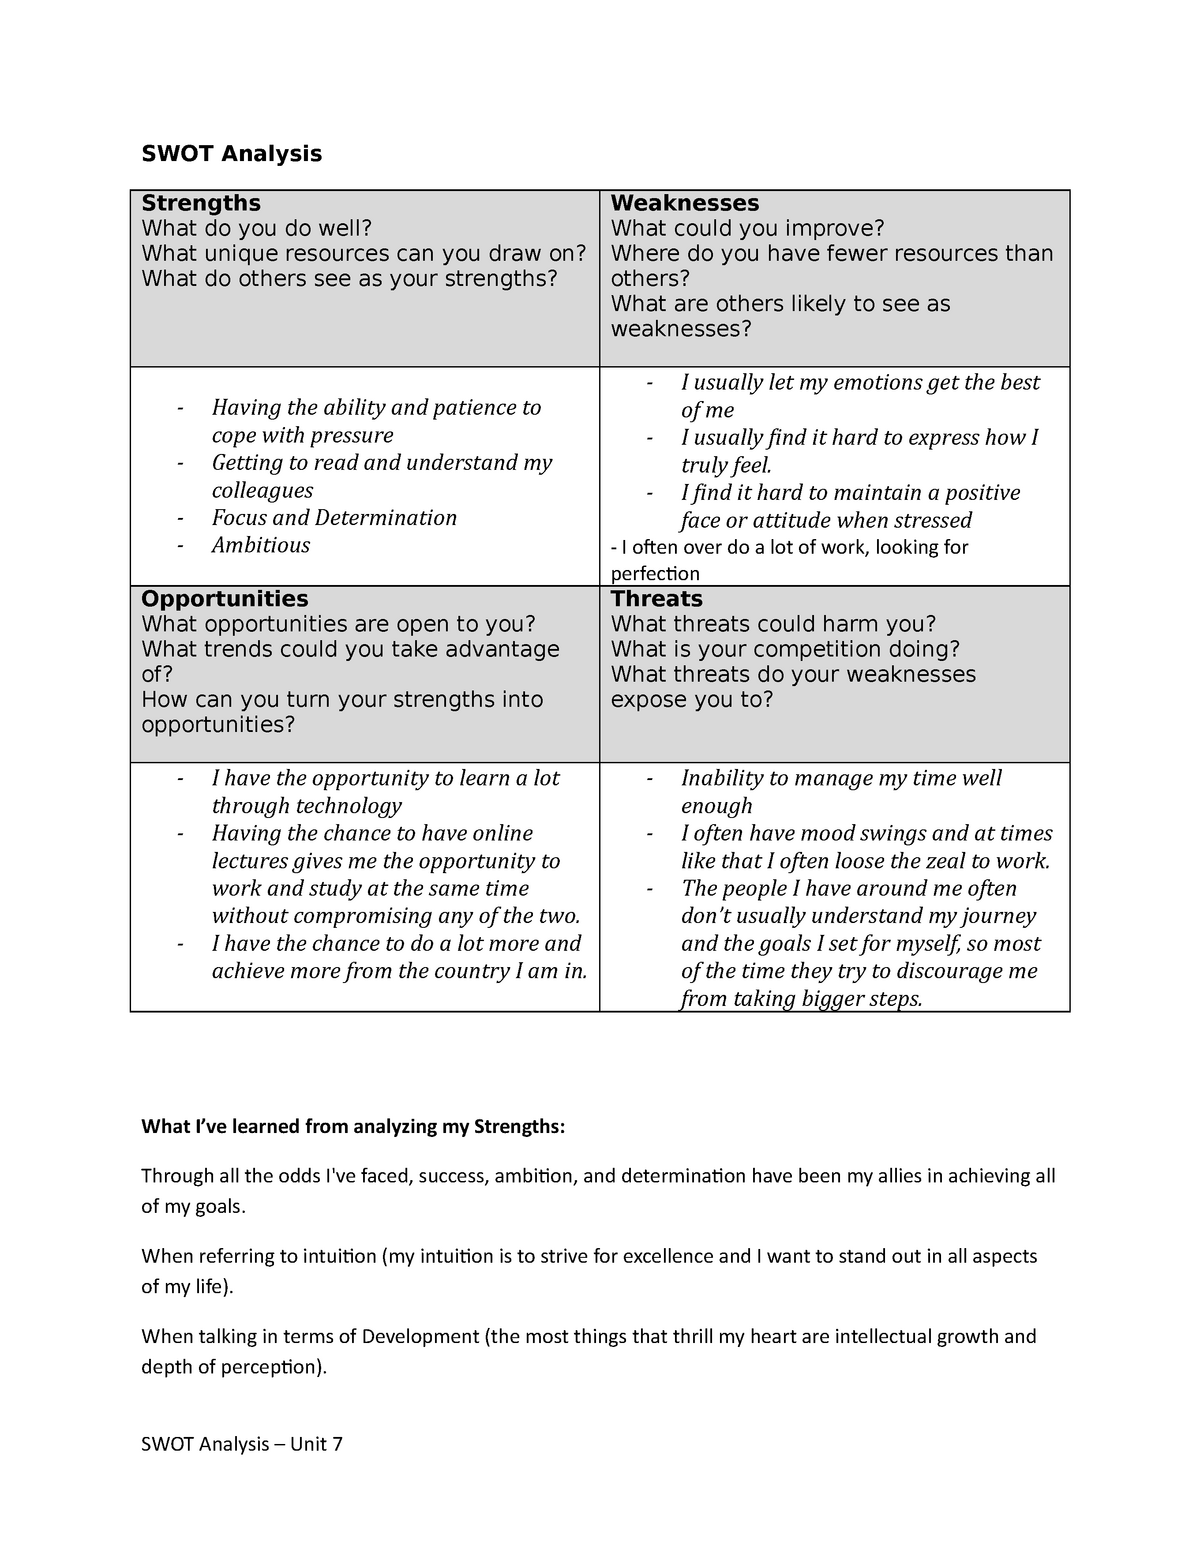 Assignment SWOT Analysis Worksheet - SWOT Analysis Strengths What do ...